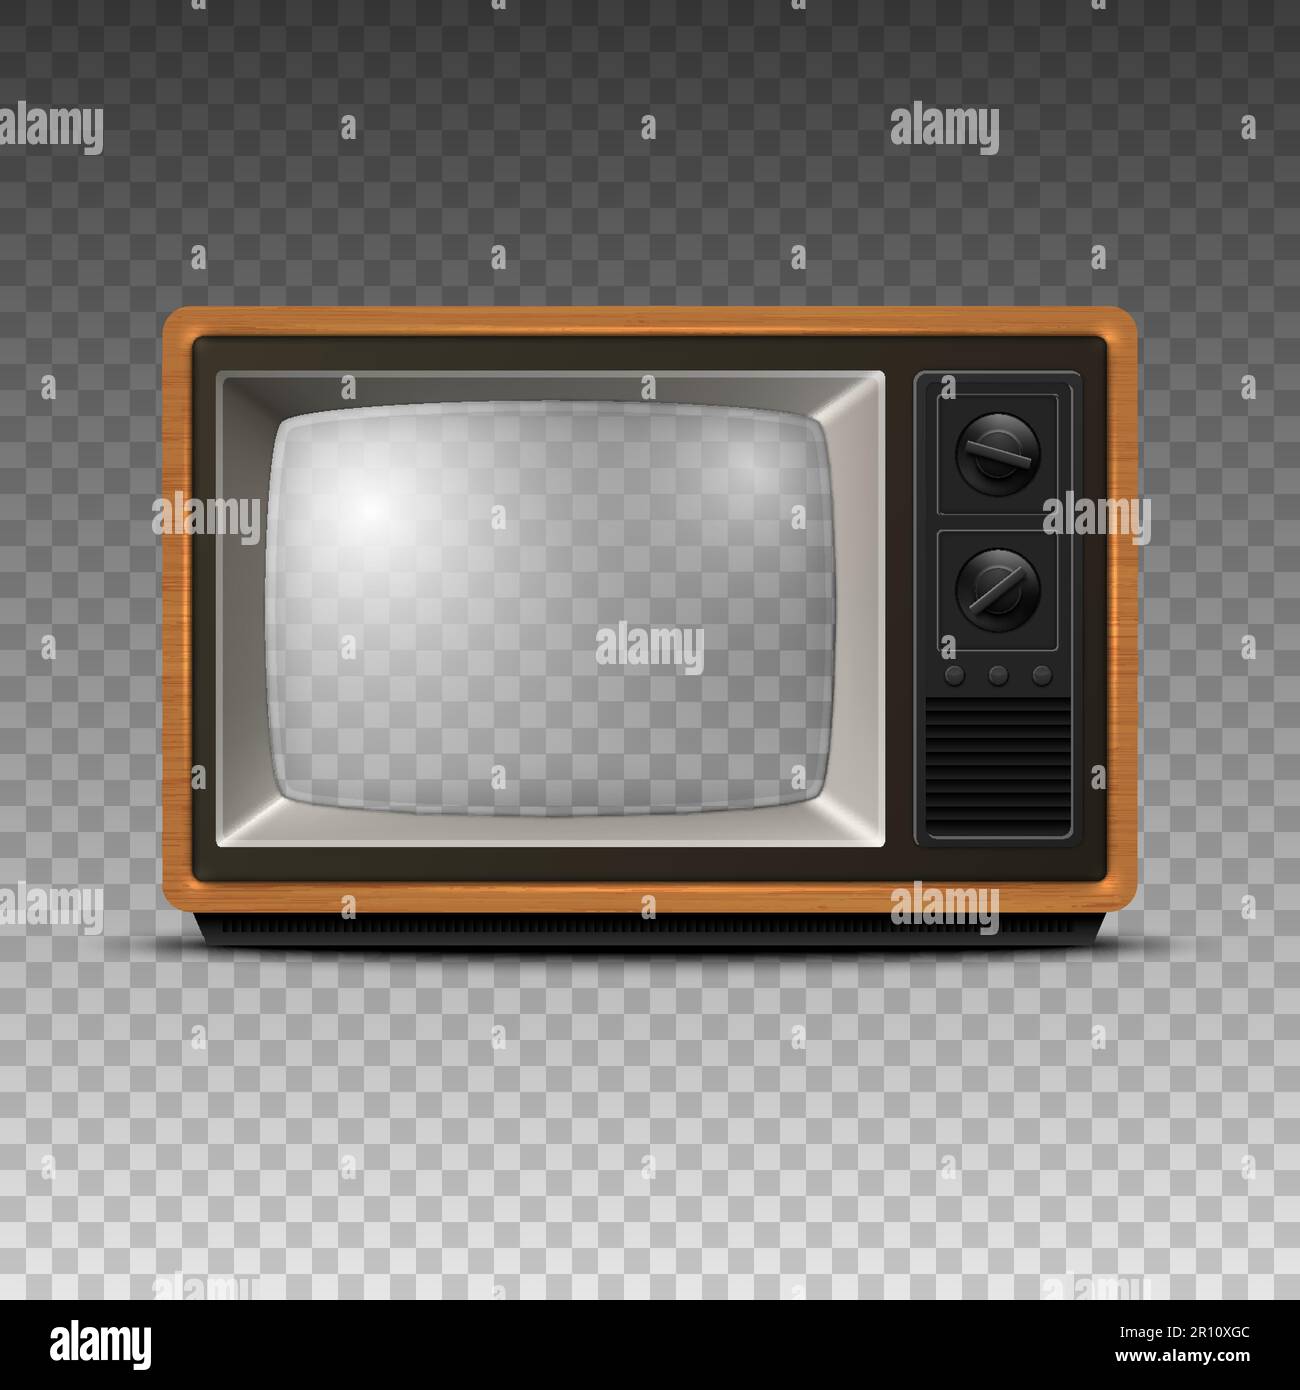 Vector 3d Realistic Retro Wooden TV Receiver Icon with Transparent Screen Closeup Isolated. Home Interior Design Concept. Vintage TV Frame, Television Stock Vector